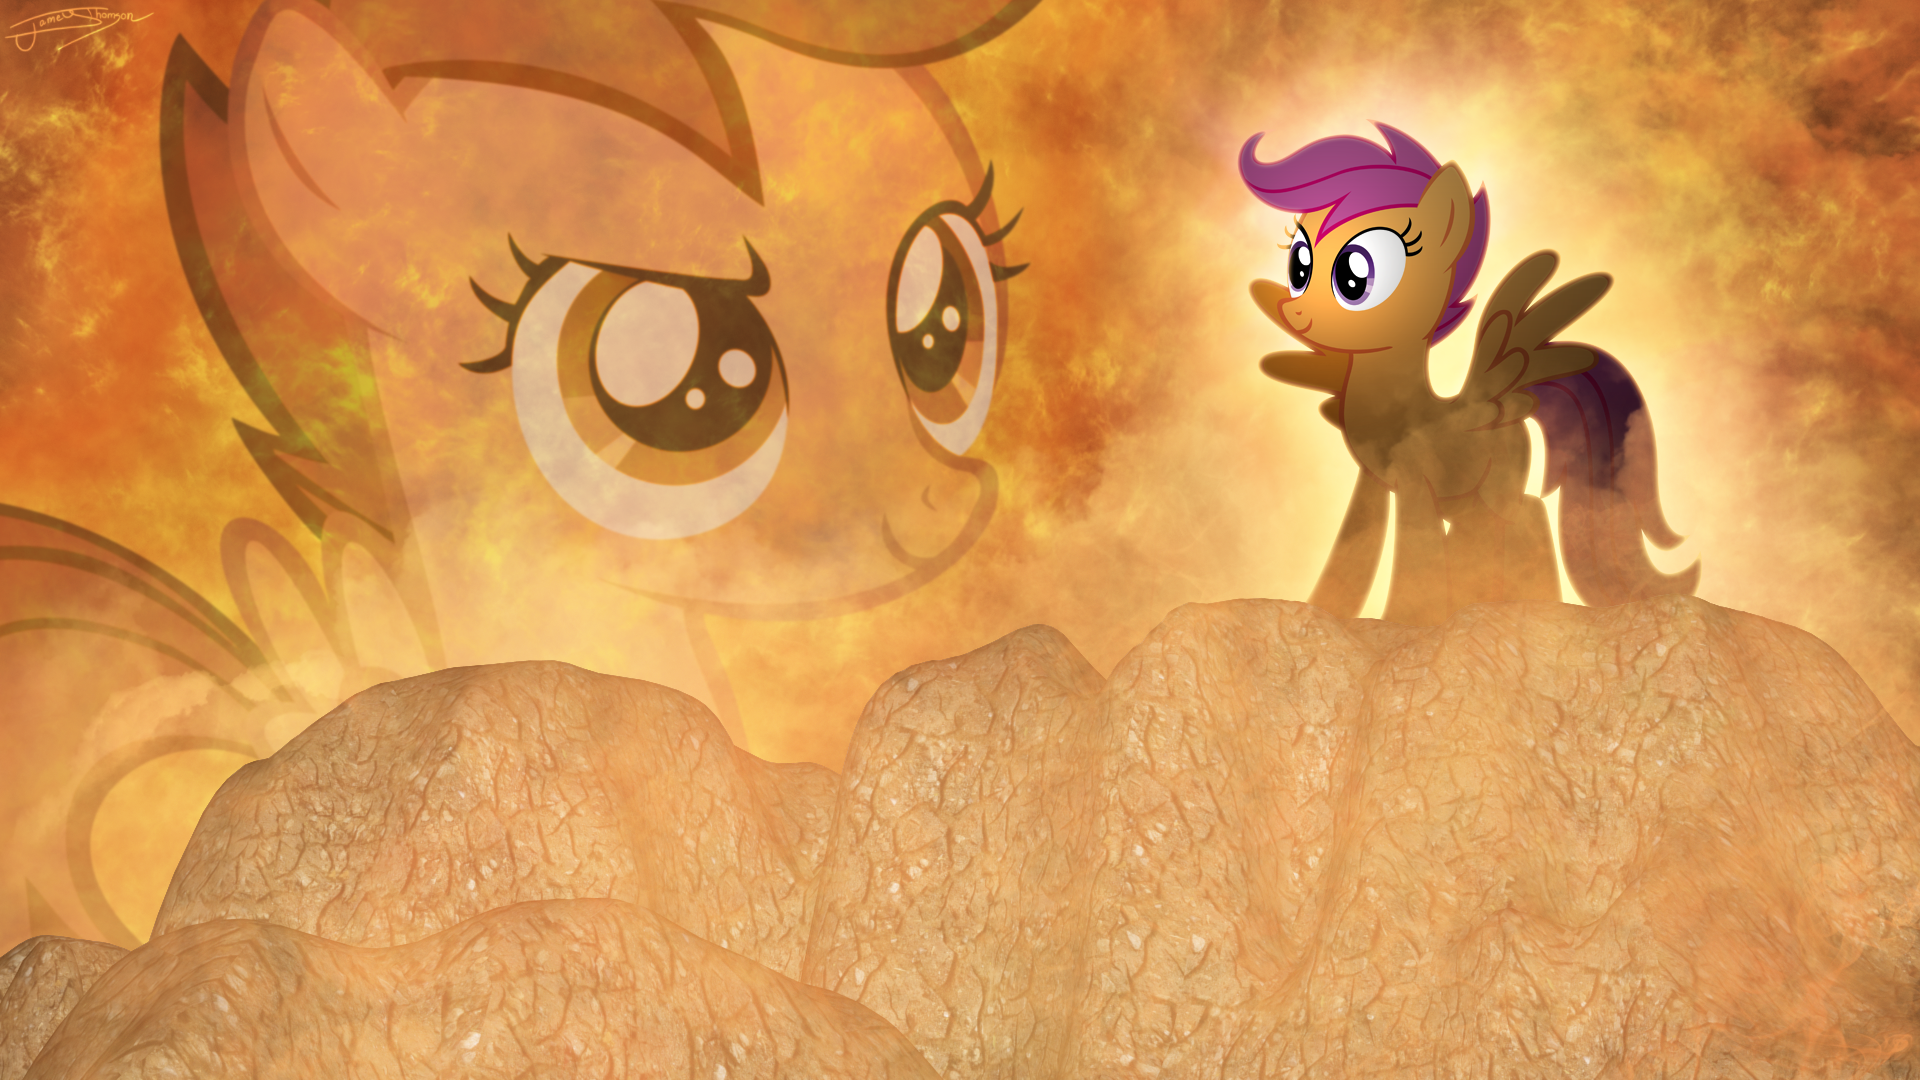 Scootaloo - Childhood Memories by Jamey4, MoongazePonies and Shelmo69